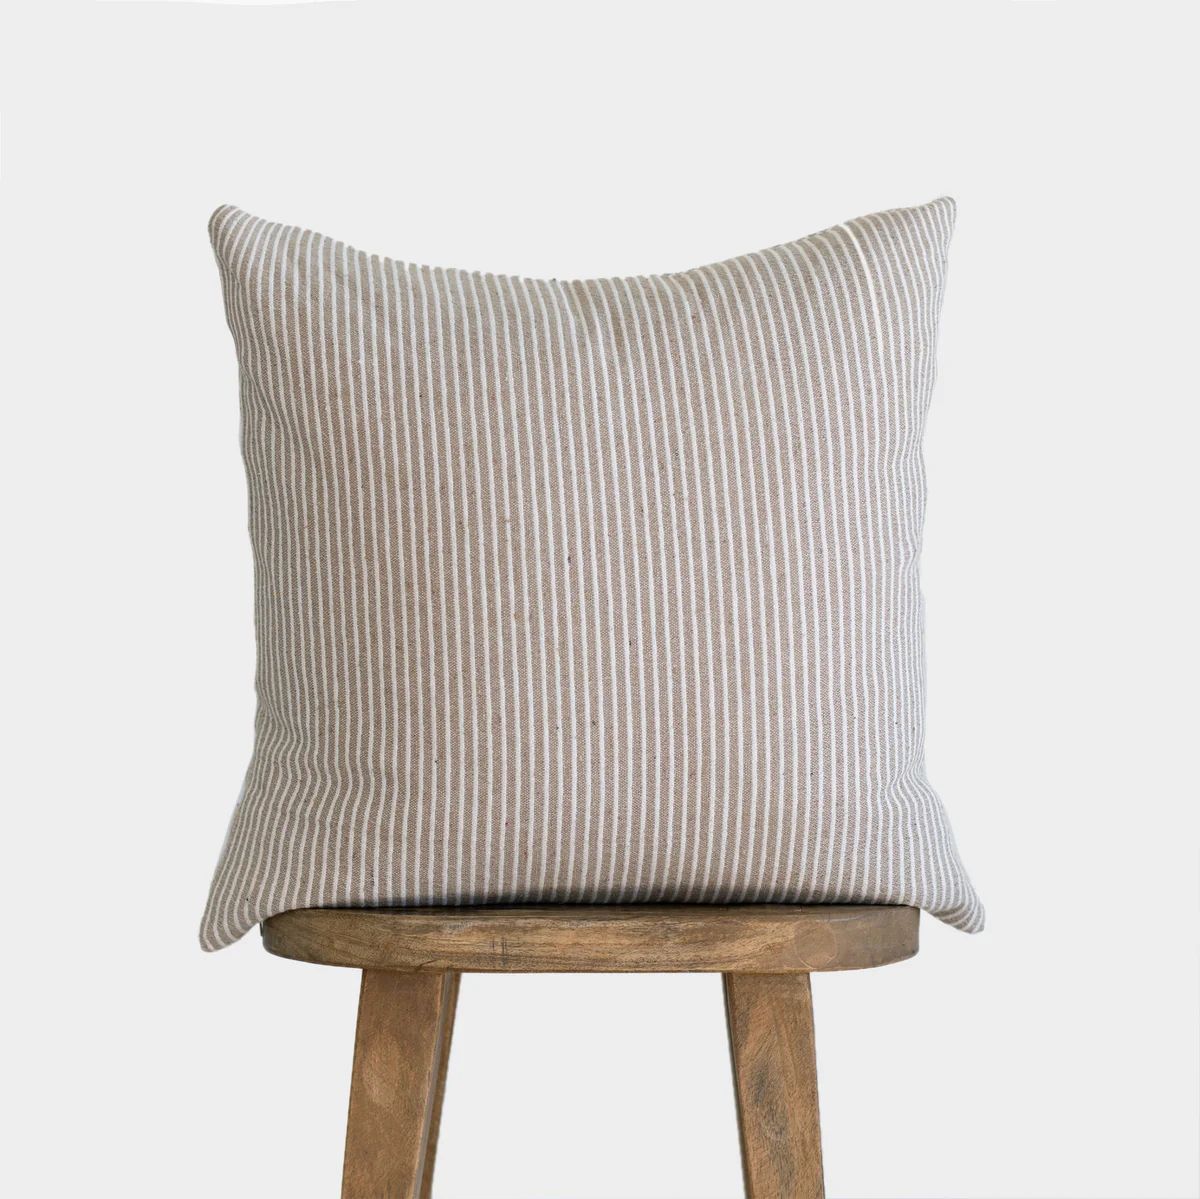 June in Tan - 18" | 22" Pillow Cover | Woven Nook